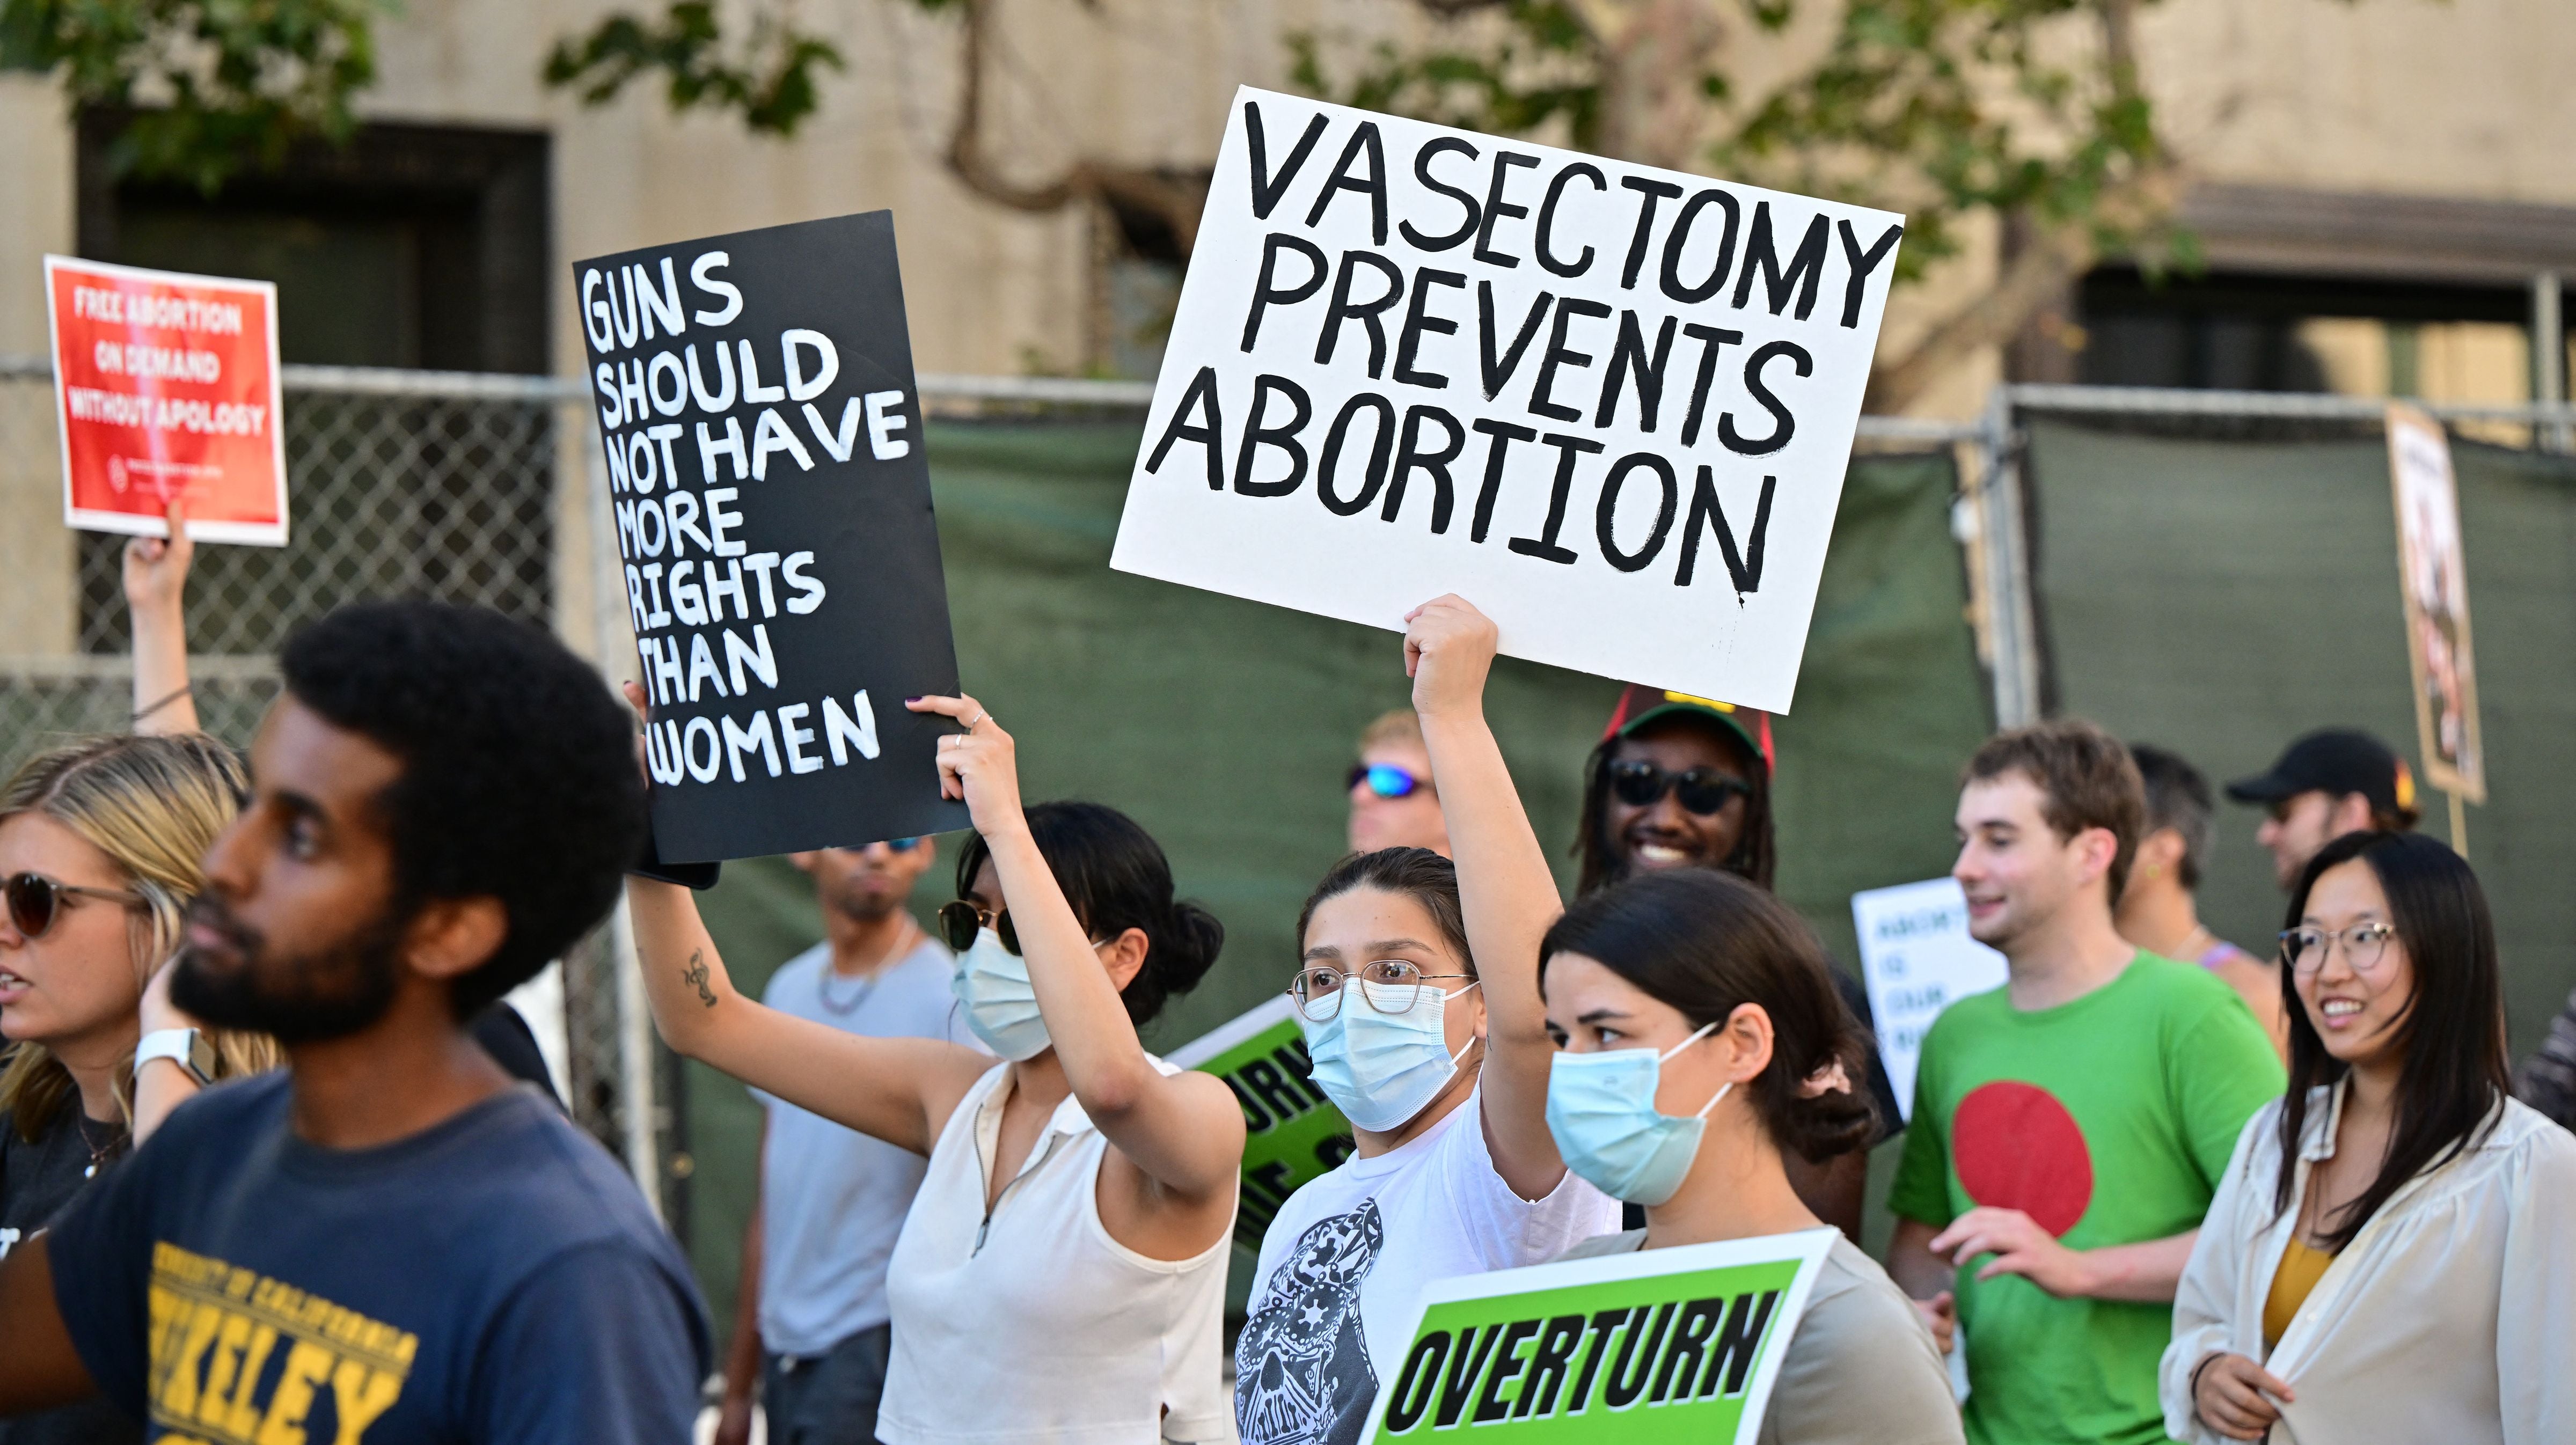 Abortion rights activists hold a sign reading "Vasectomy Prevents Abortion" as they protest after the overturning of Roe Vs. Wade by the US Supreme Court, in Downtown Los Angeles, on June 24, 2022